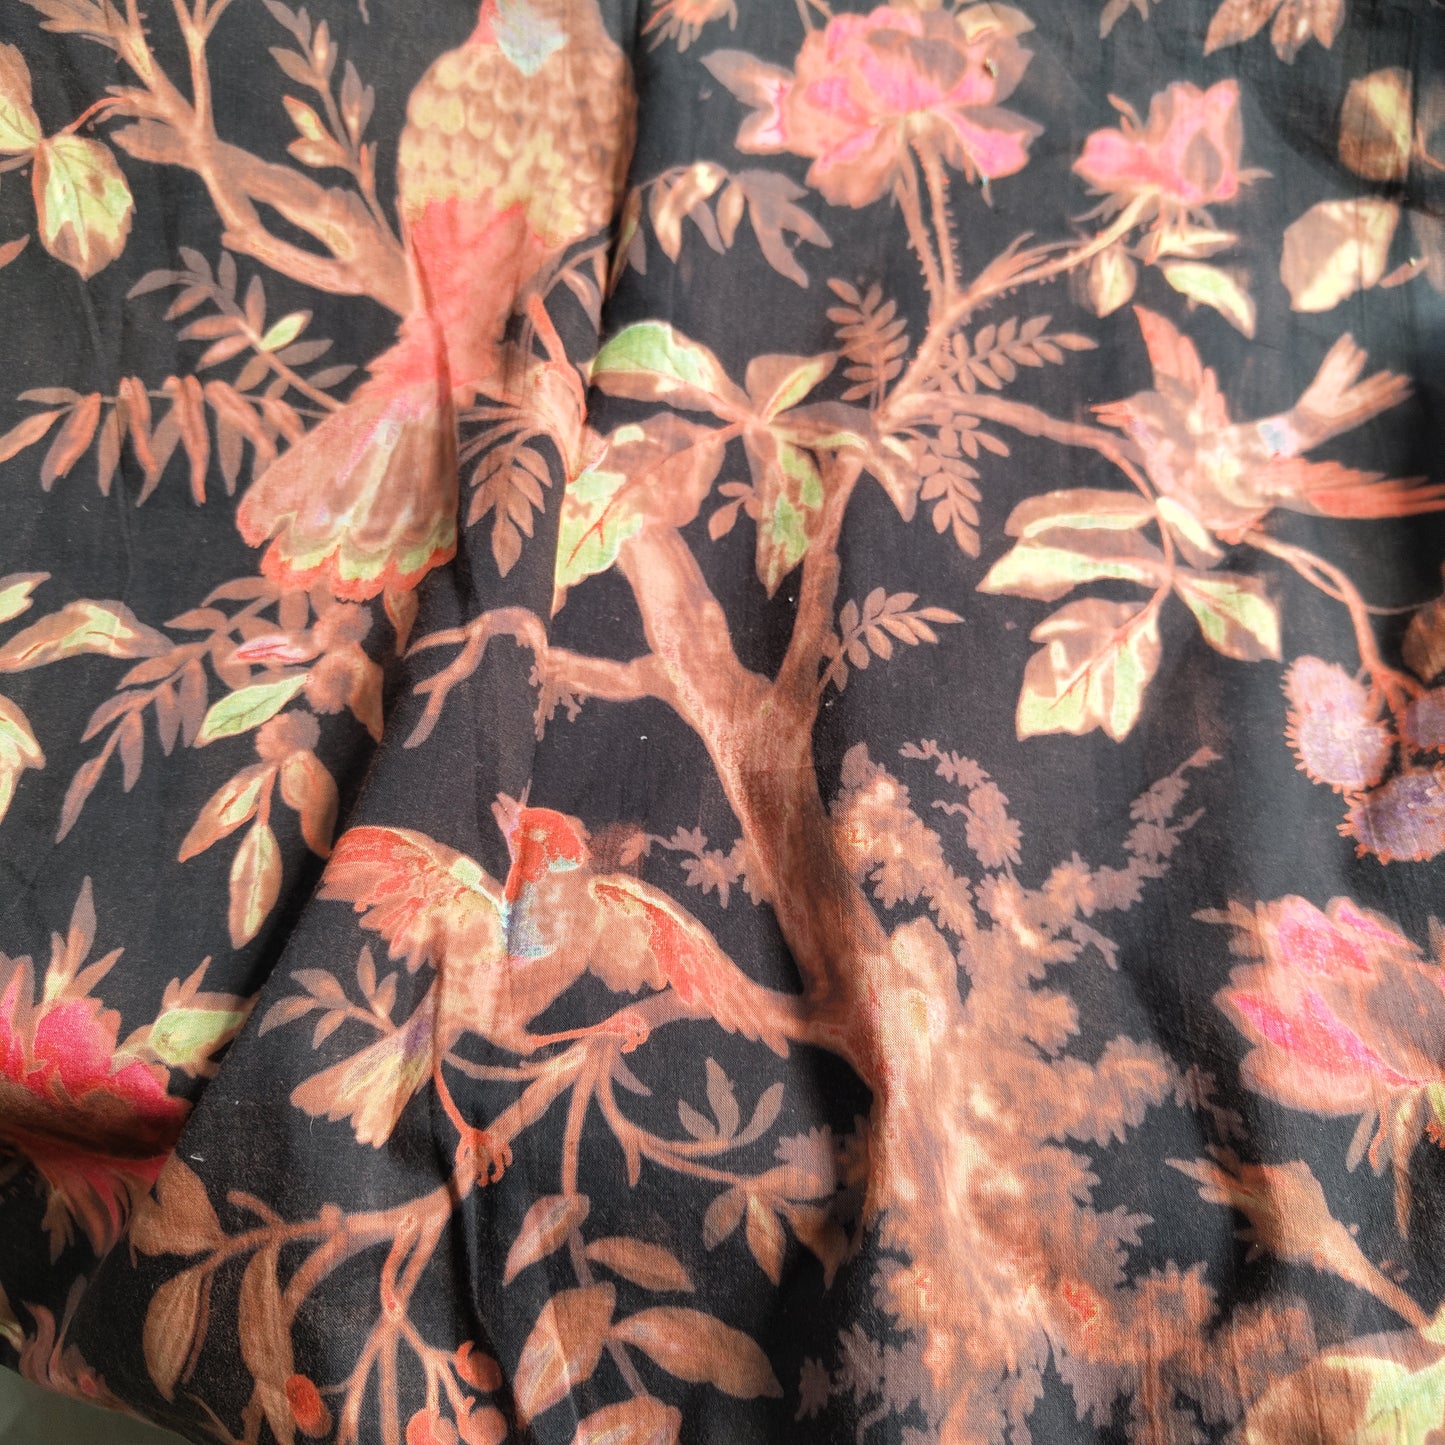 Birds of paradise shades of black Cotton cambric 44 inches width Fabric per meter